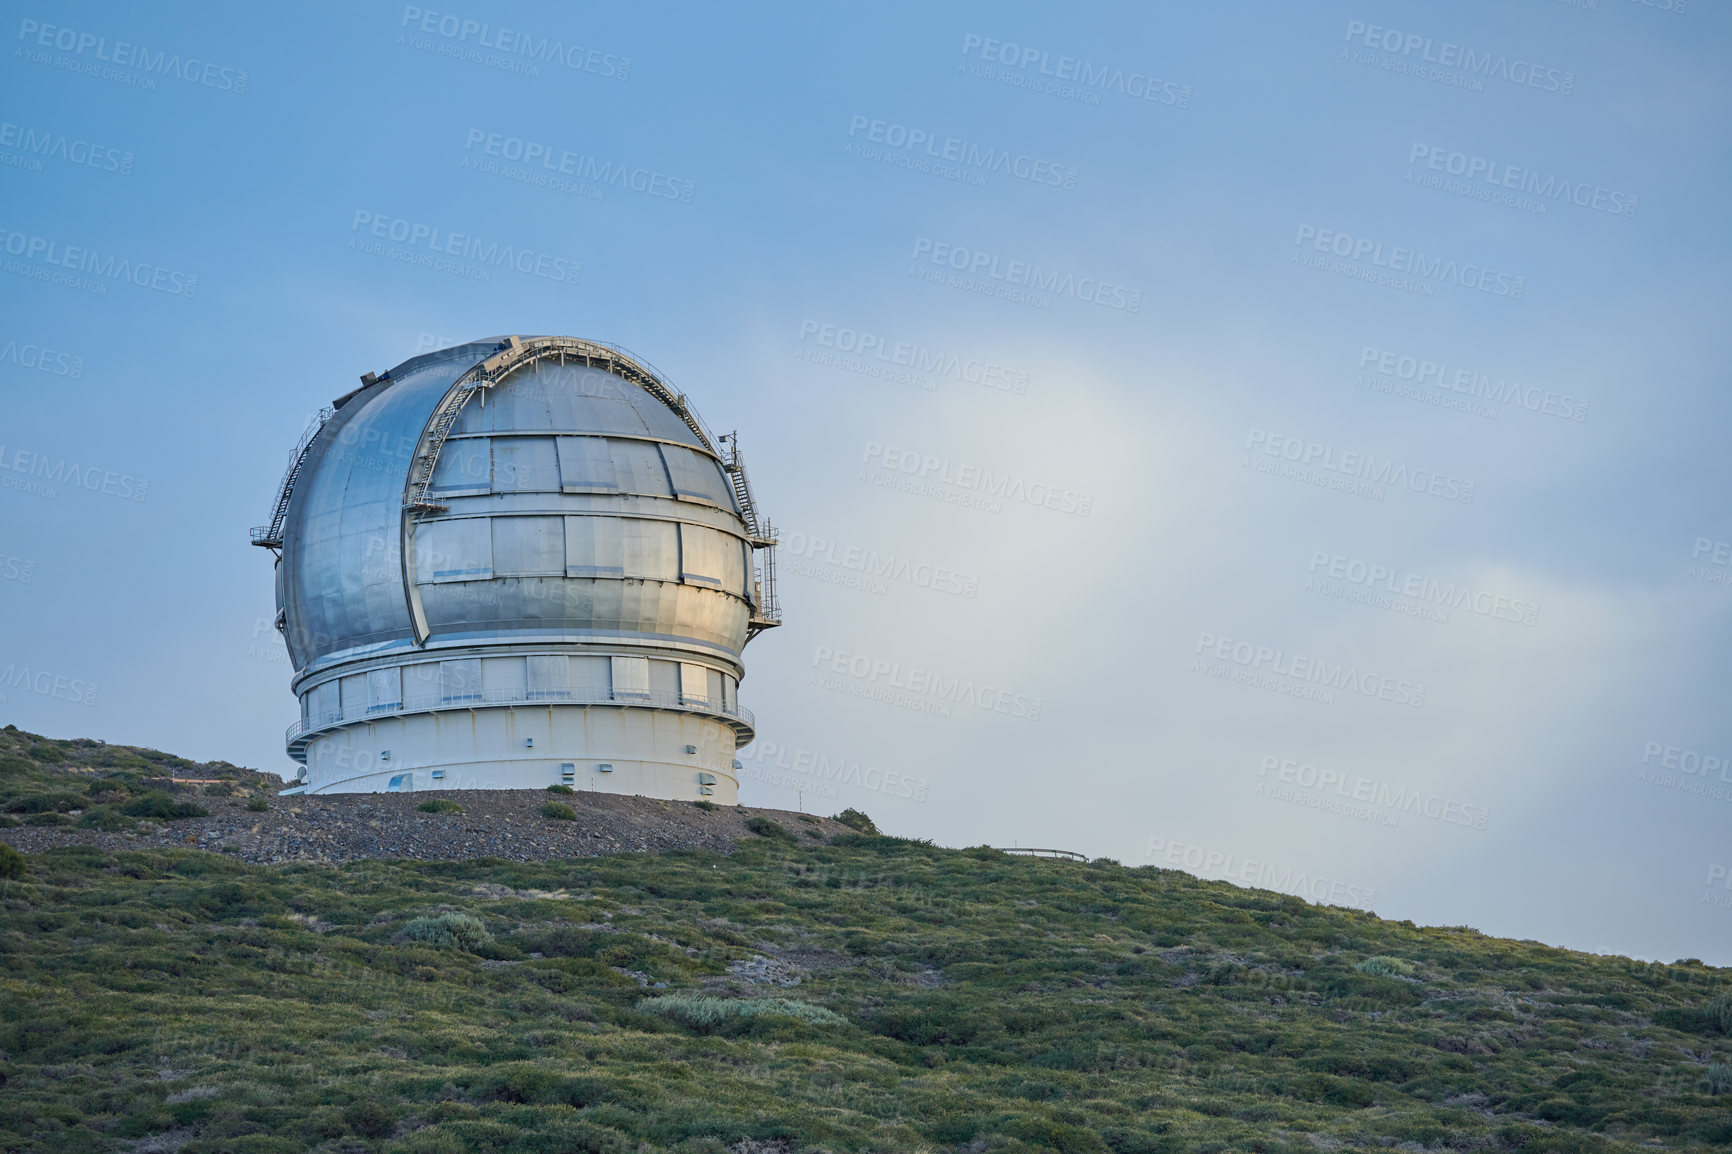 Buy stock photo Scenic view of an astronomy observatory dome in Roque de los Muchachos, La Palma, Spain. Landscape of science infrastructure or building against a blue sky and copy space. Tourism abroad or overseas